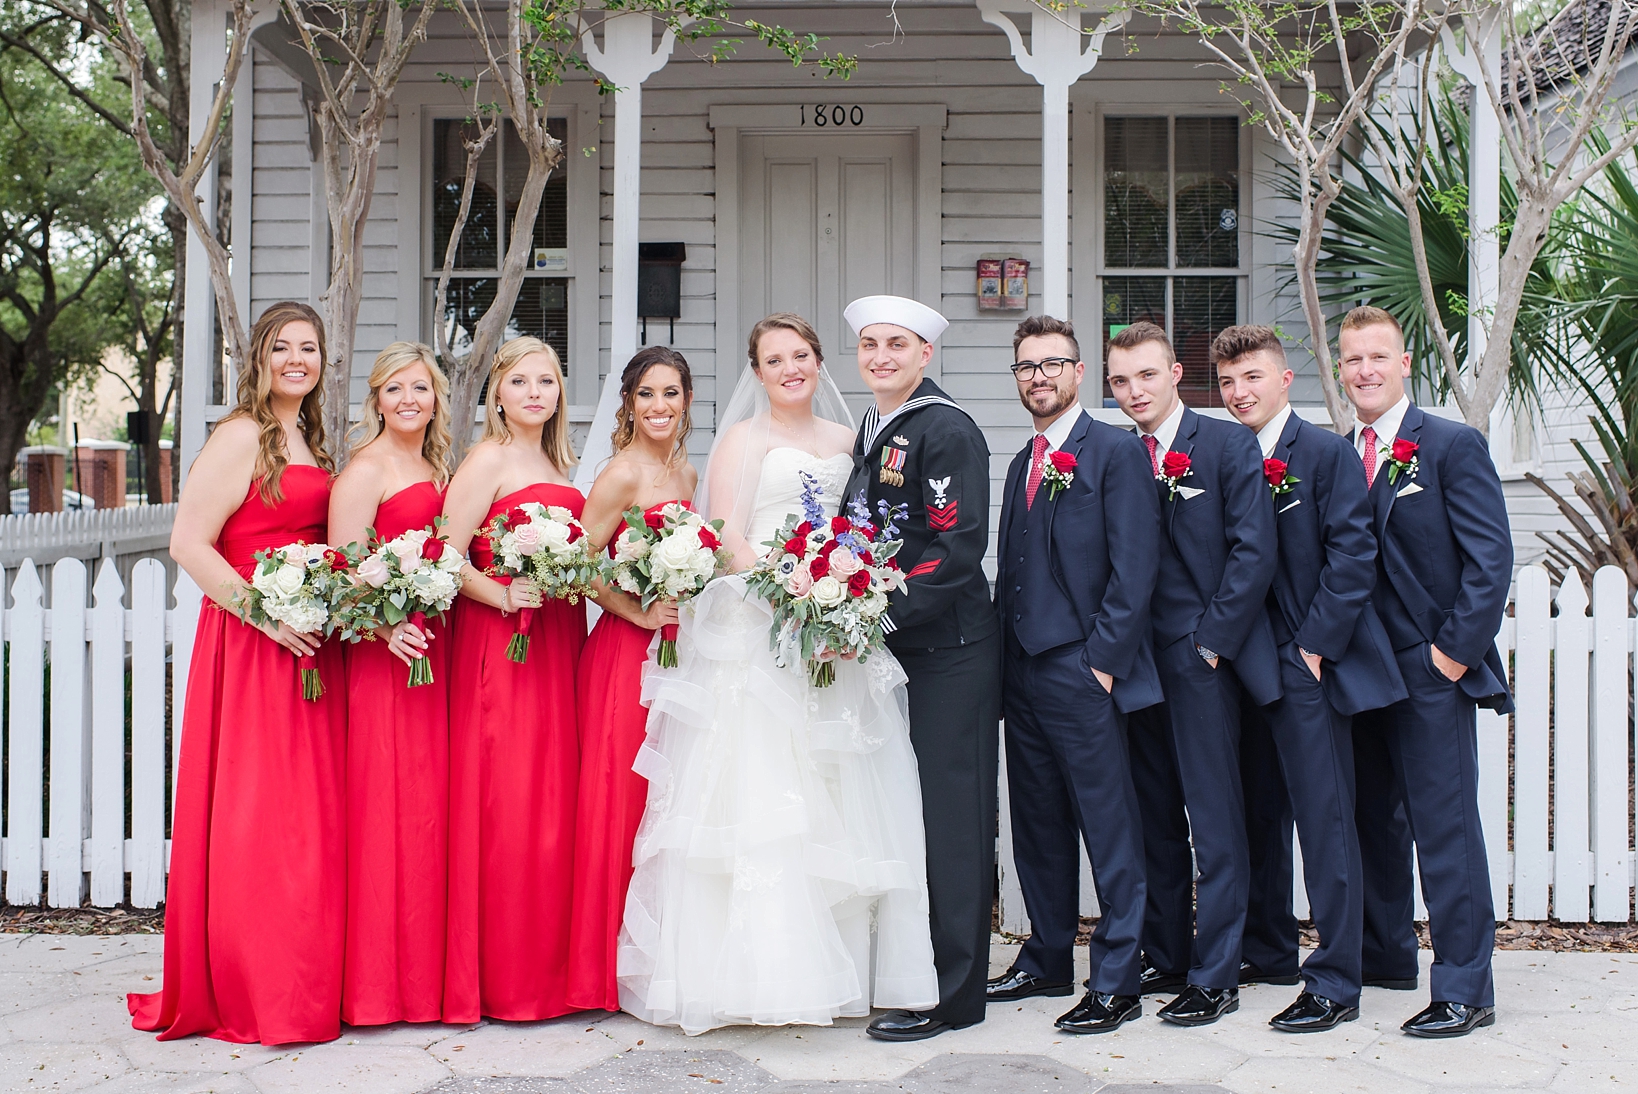 The entire wedding party in Historic Ybor City, Tampa Florida